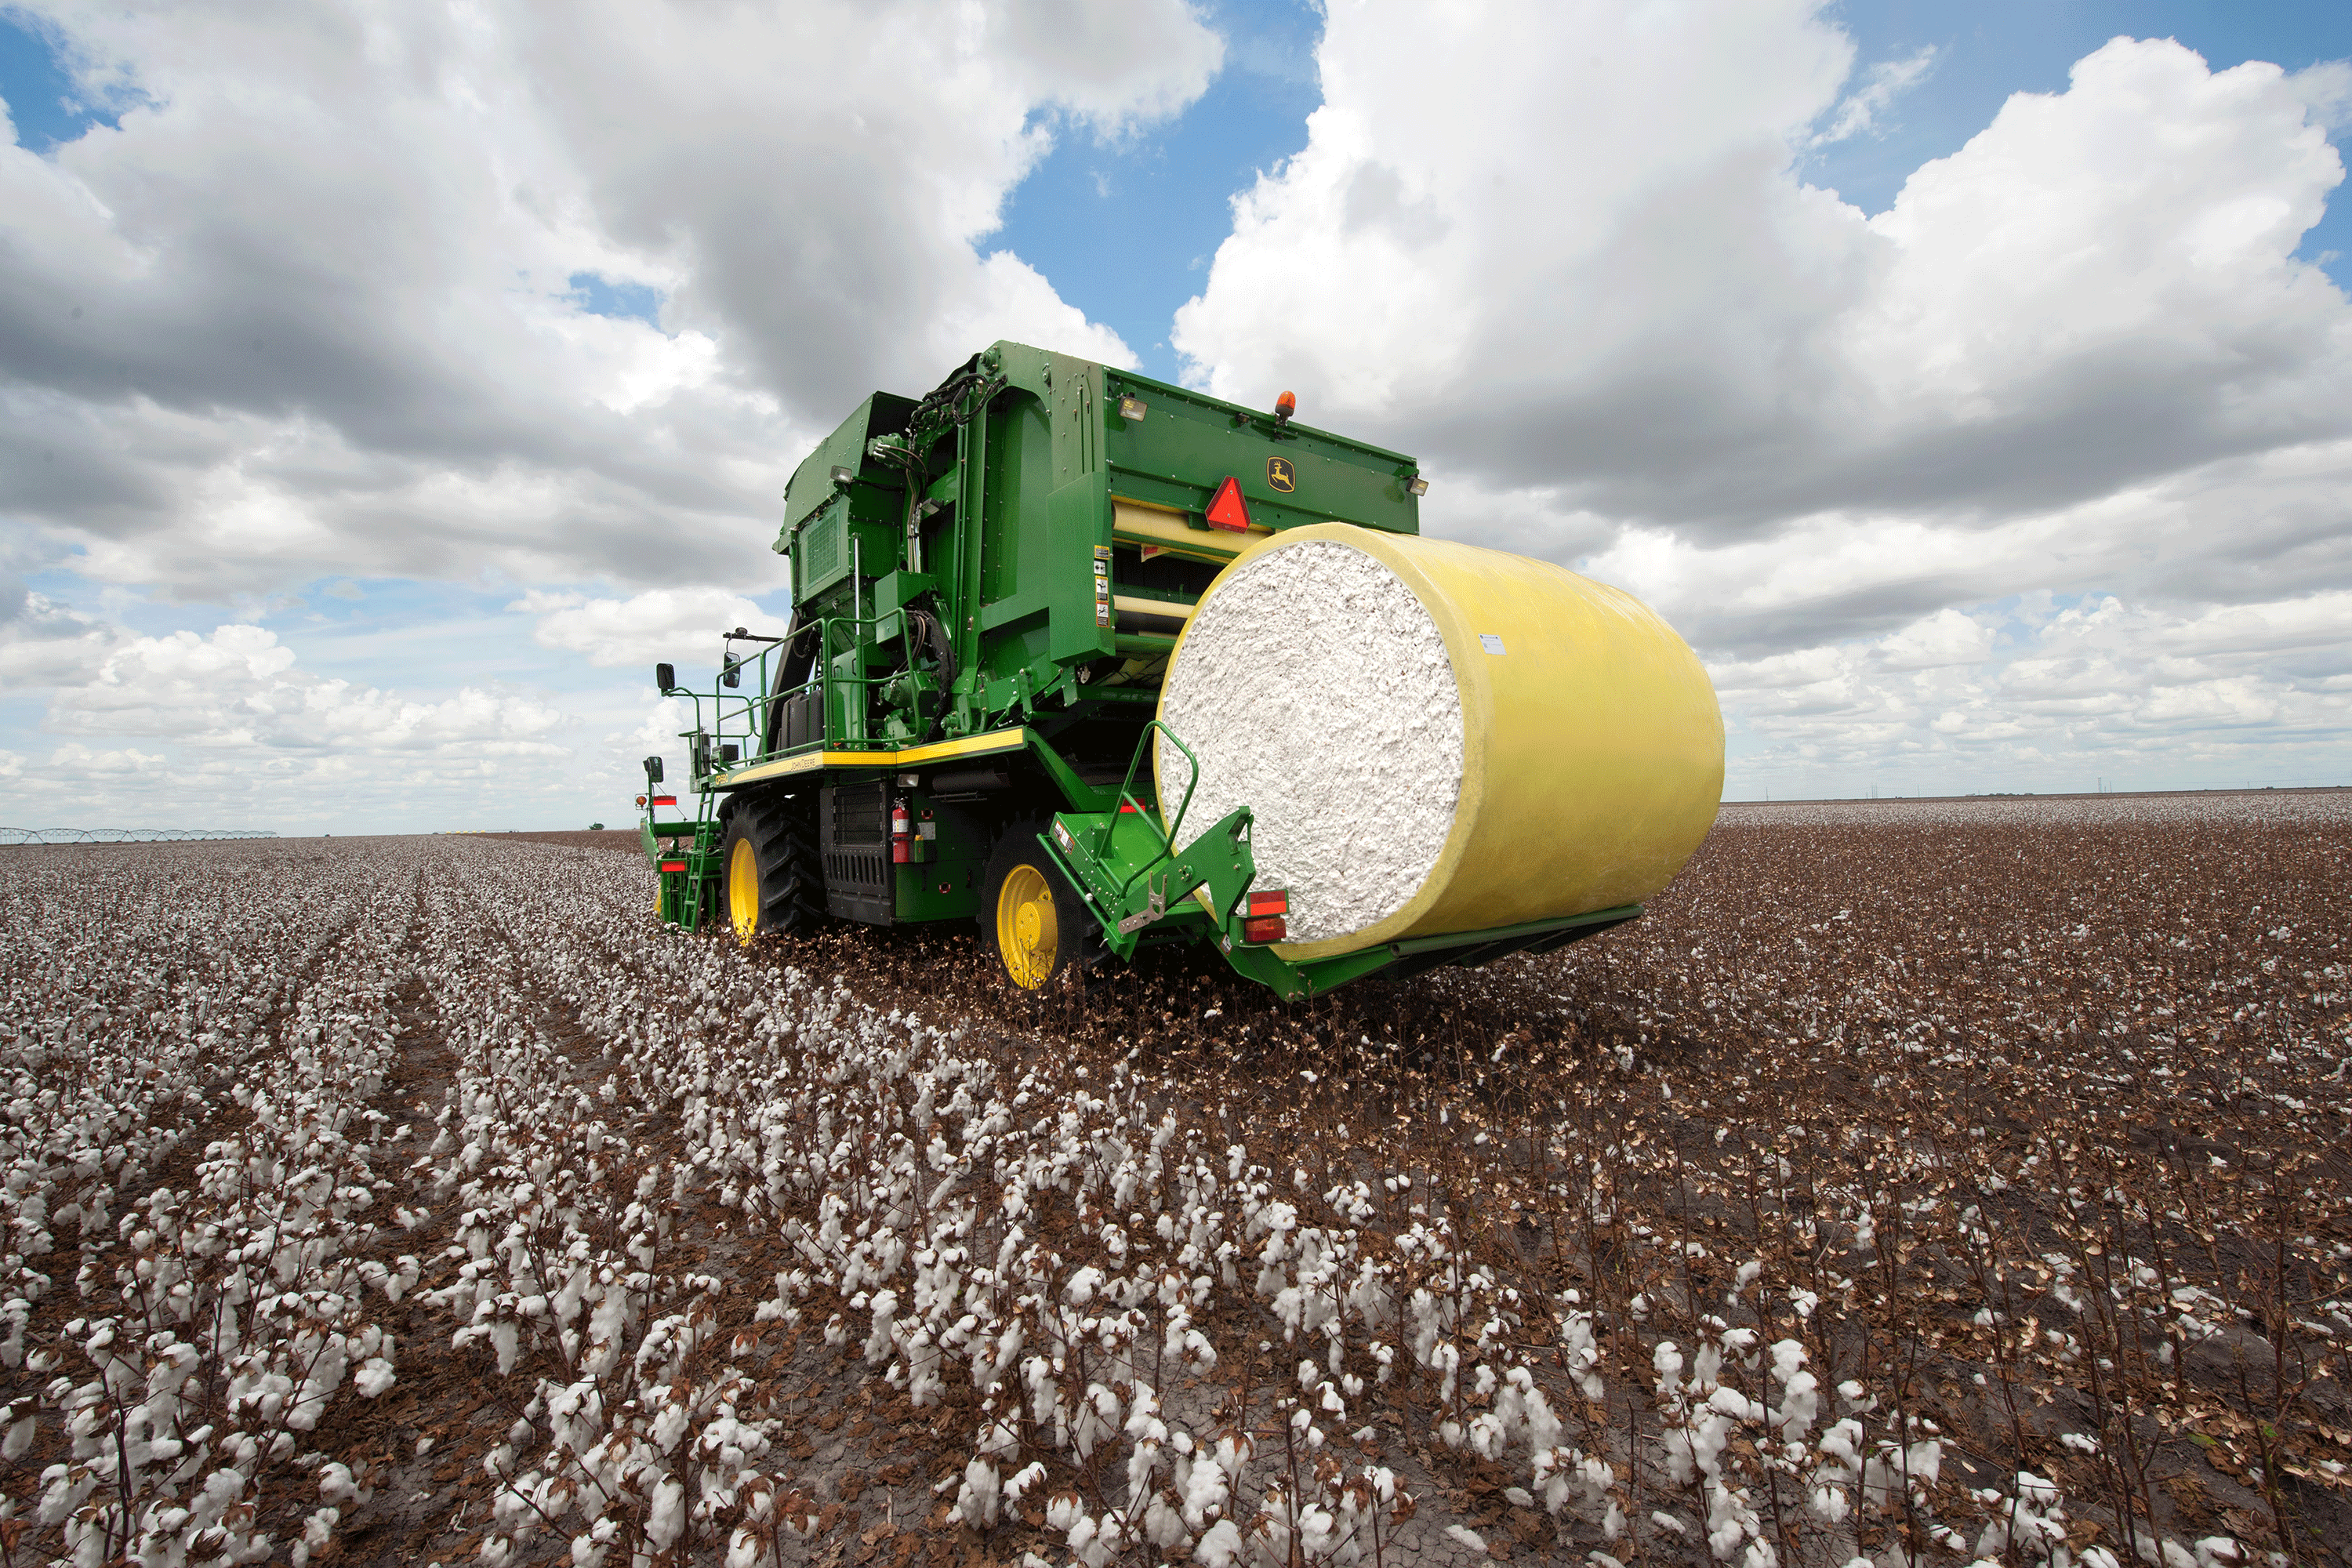 Plains Cotton Growers Annual Meeting in April Cancelled Due to Coronavirus Containment Efforts